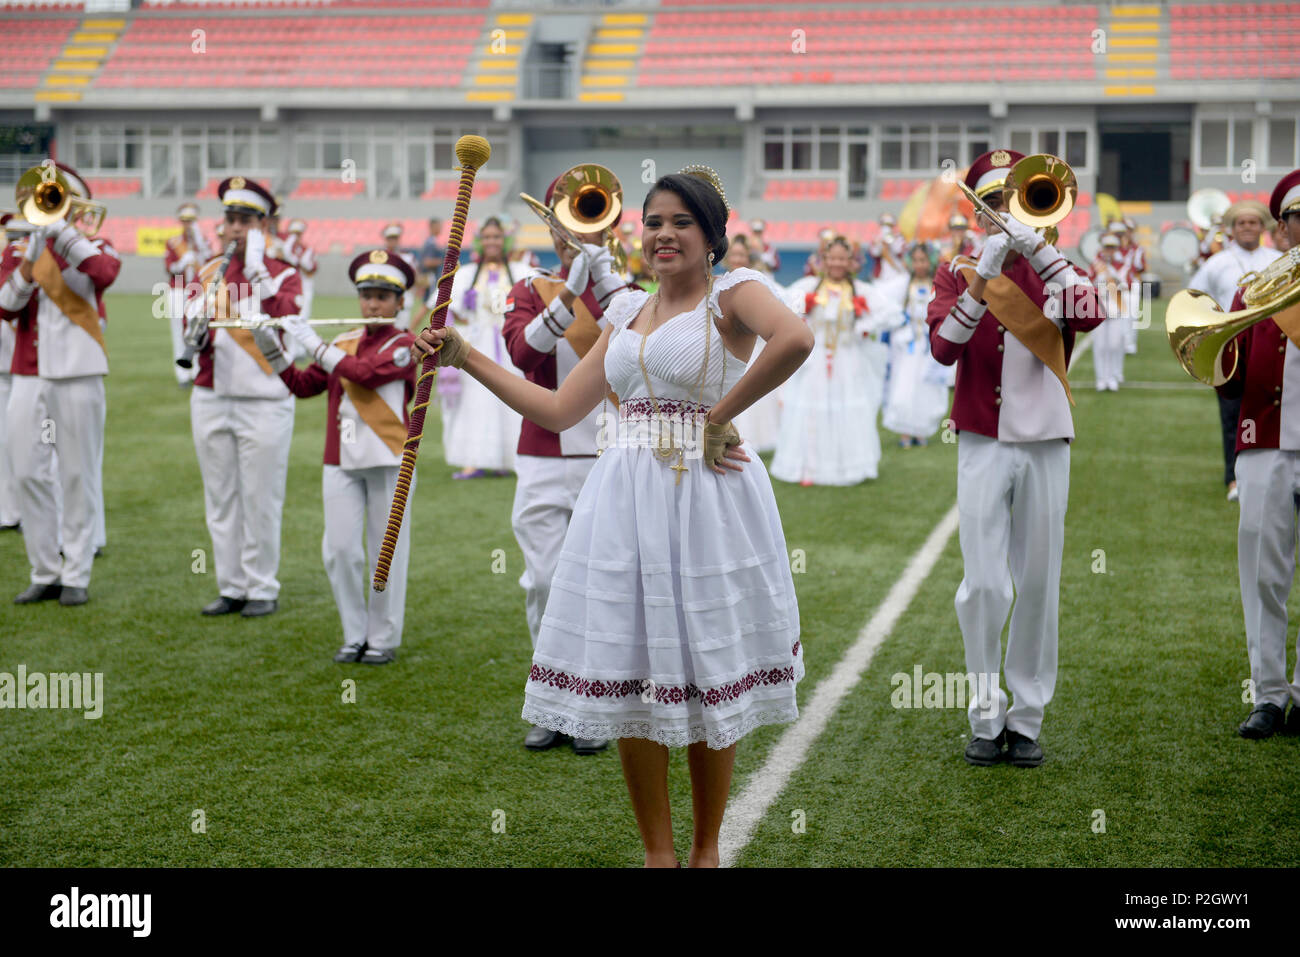 PANAMA CITY, Panama (Sept. 20, 2016) - The Colegio Moises Castillo High School marching band performs during a day of sports at the Estadio Maracaná de Panamá soccer stadium. UNITAS, Latin for "unity," is an annual multinational exercise designed to enhance South American and U.S. naval and public security forces cooperation and improve joint maritime operations. (U.S. Navy Photo by Mass Communication Specialist 1st Class Jacob Sippel) Stock Photo